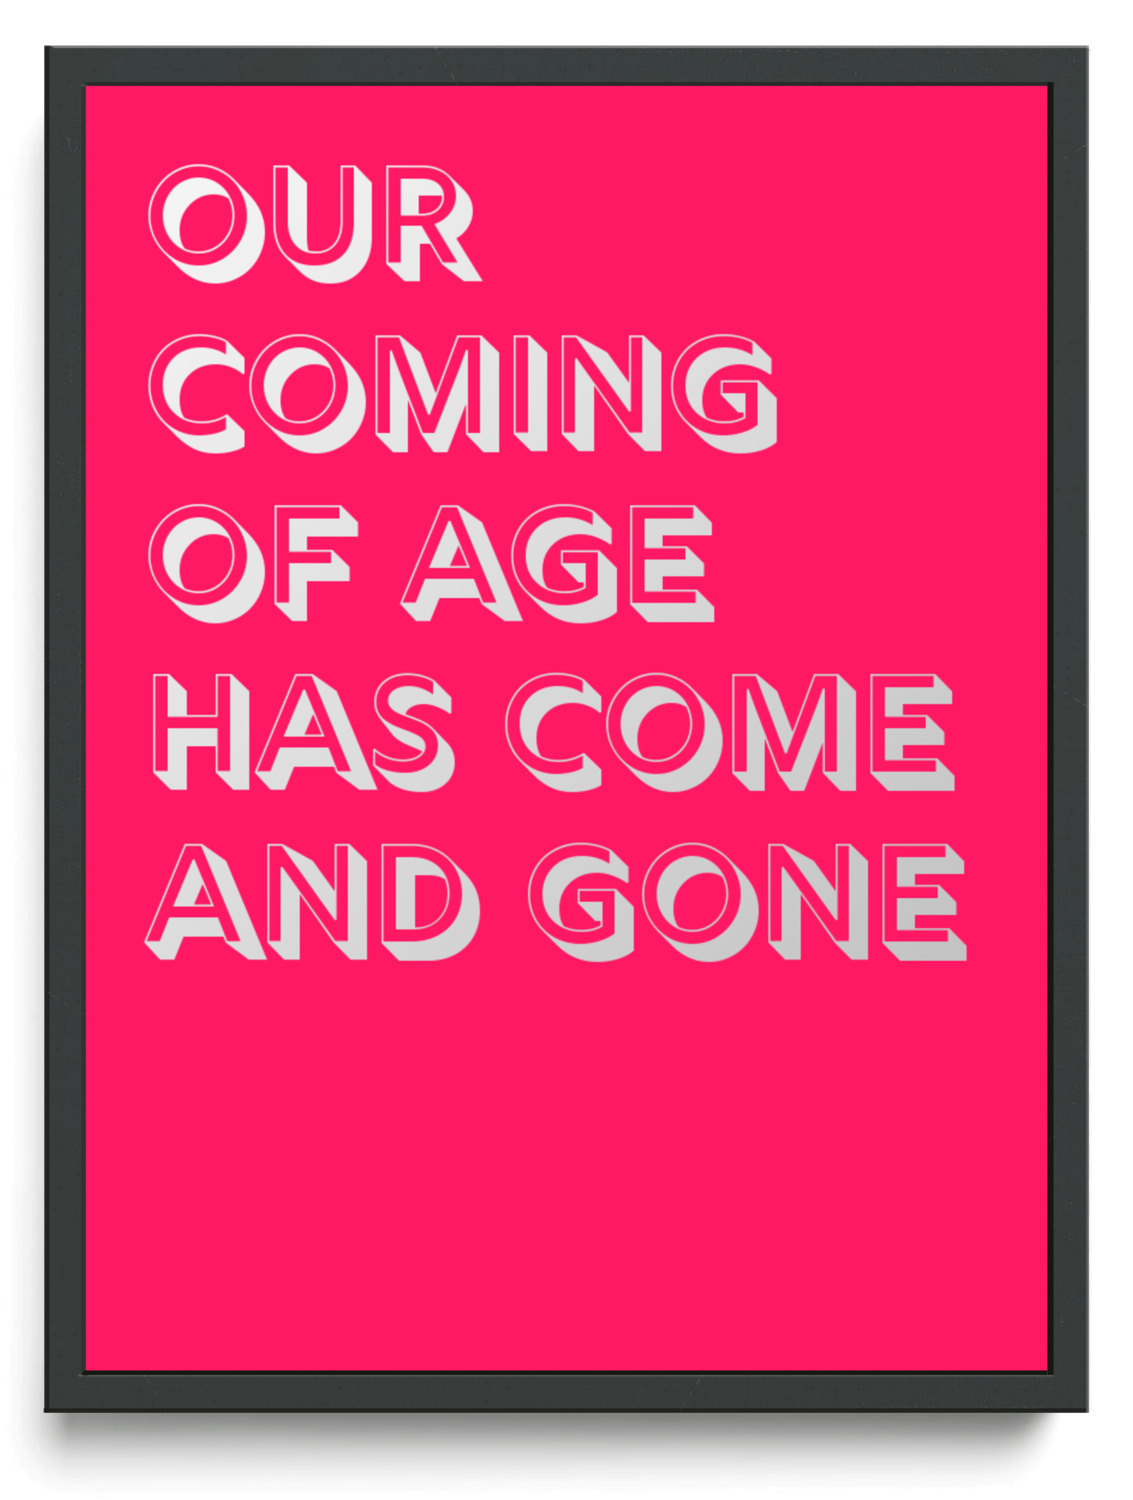 Our coming of age has come and gone